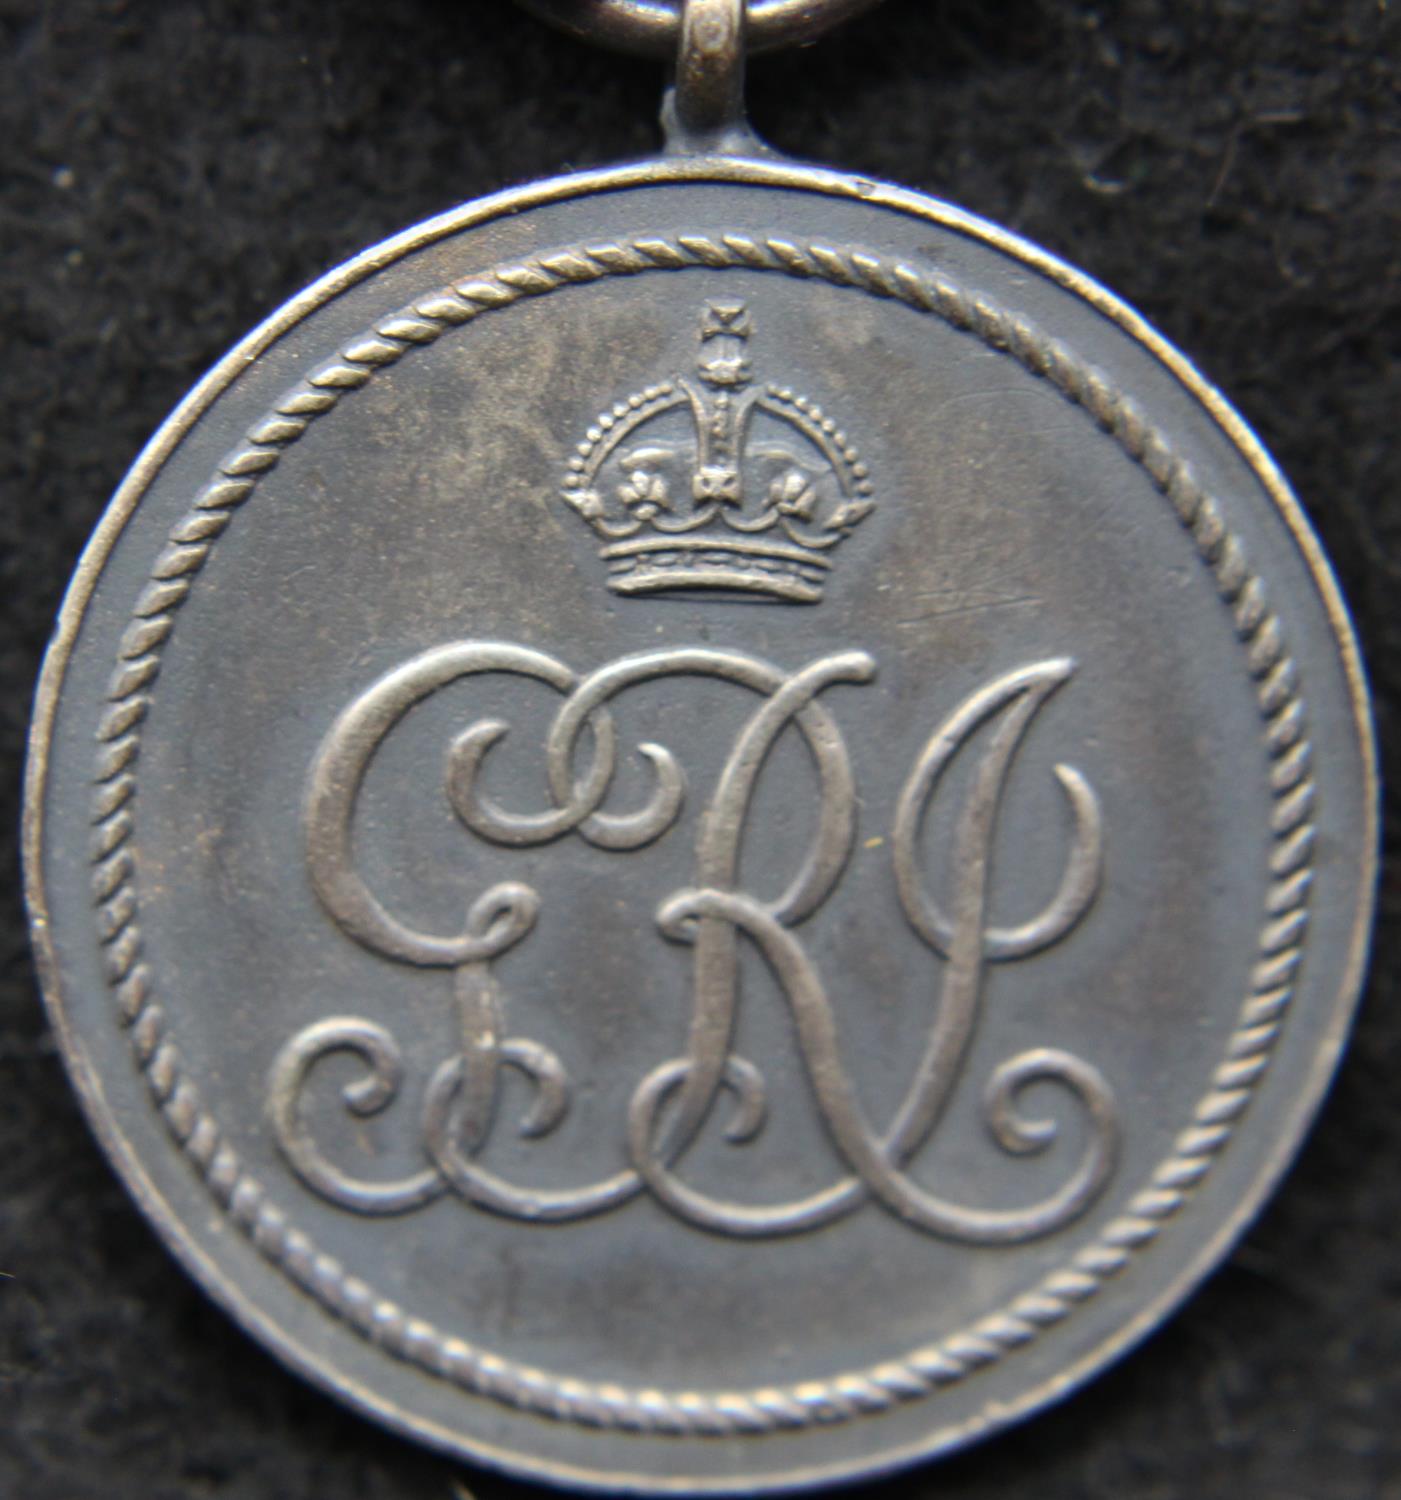 MISS ELSIE BARNES, a British first type Medal of the Order of the British Empire. P&P Group 1 (£14+